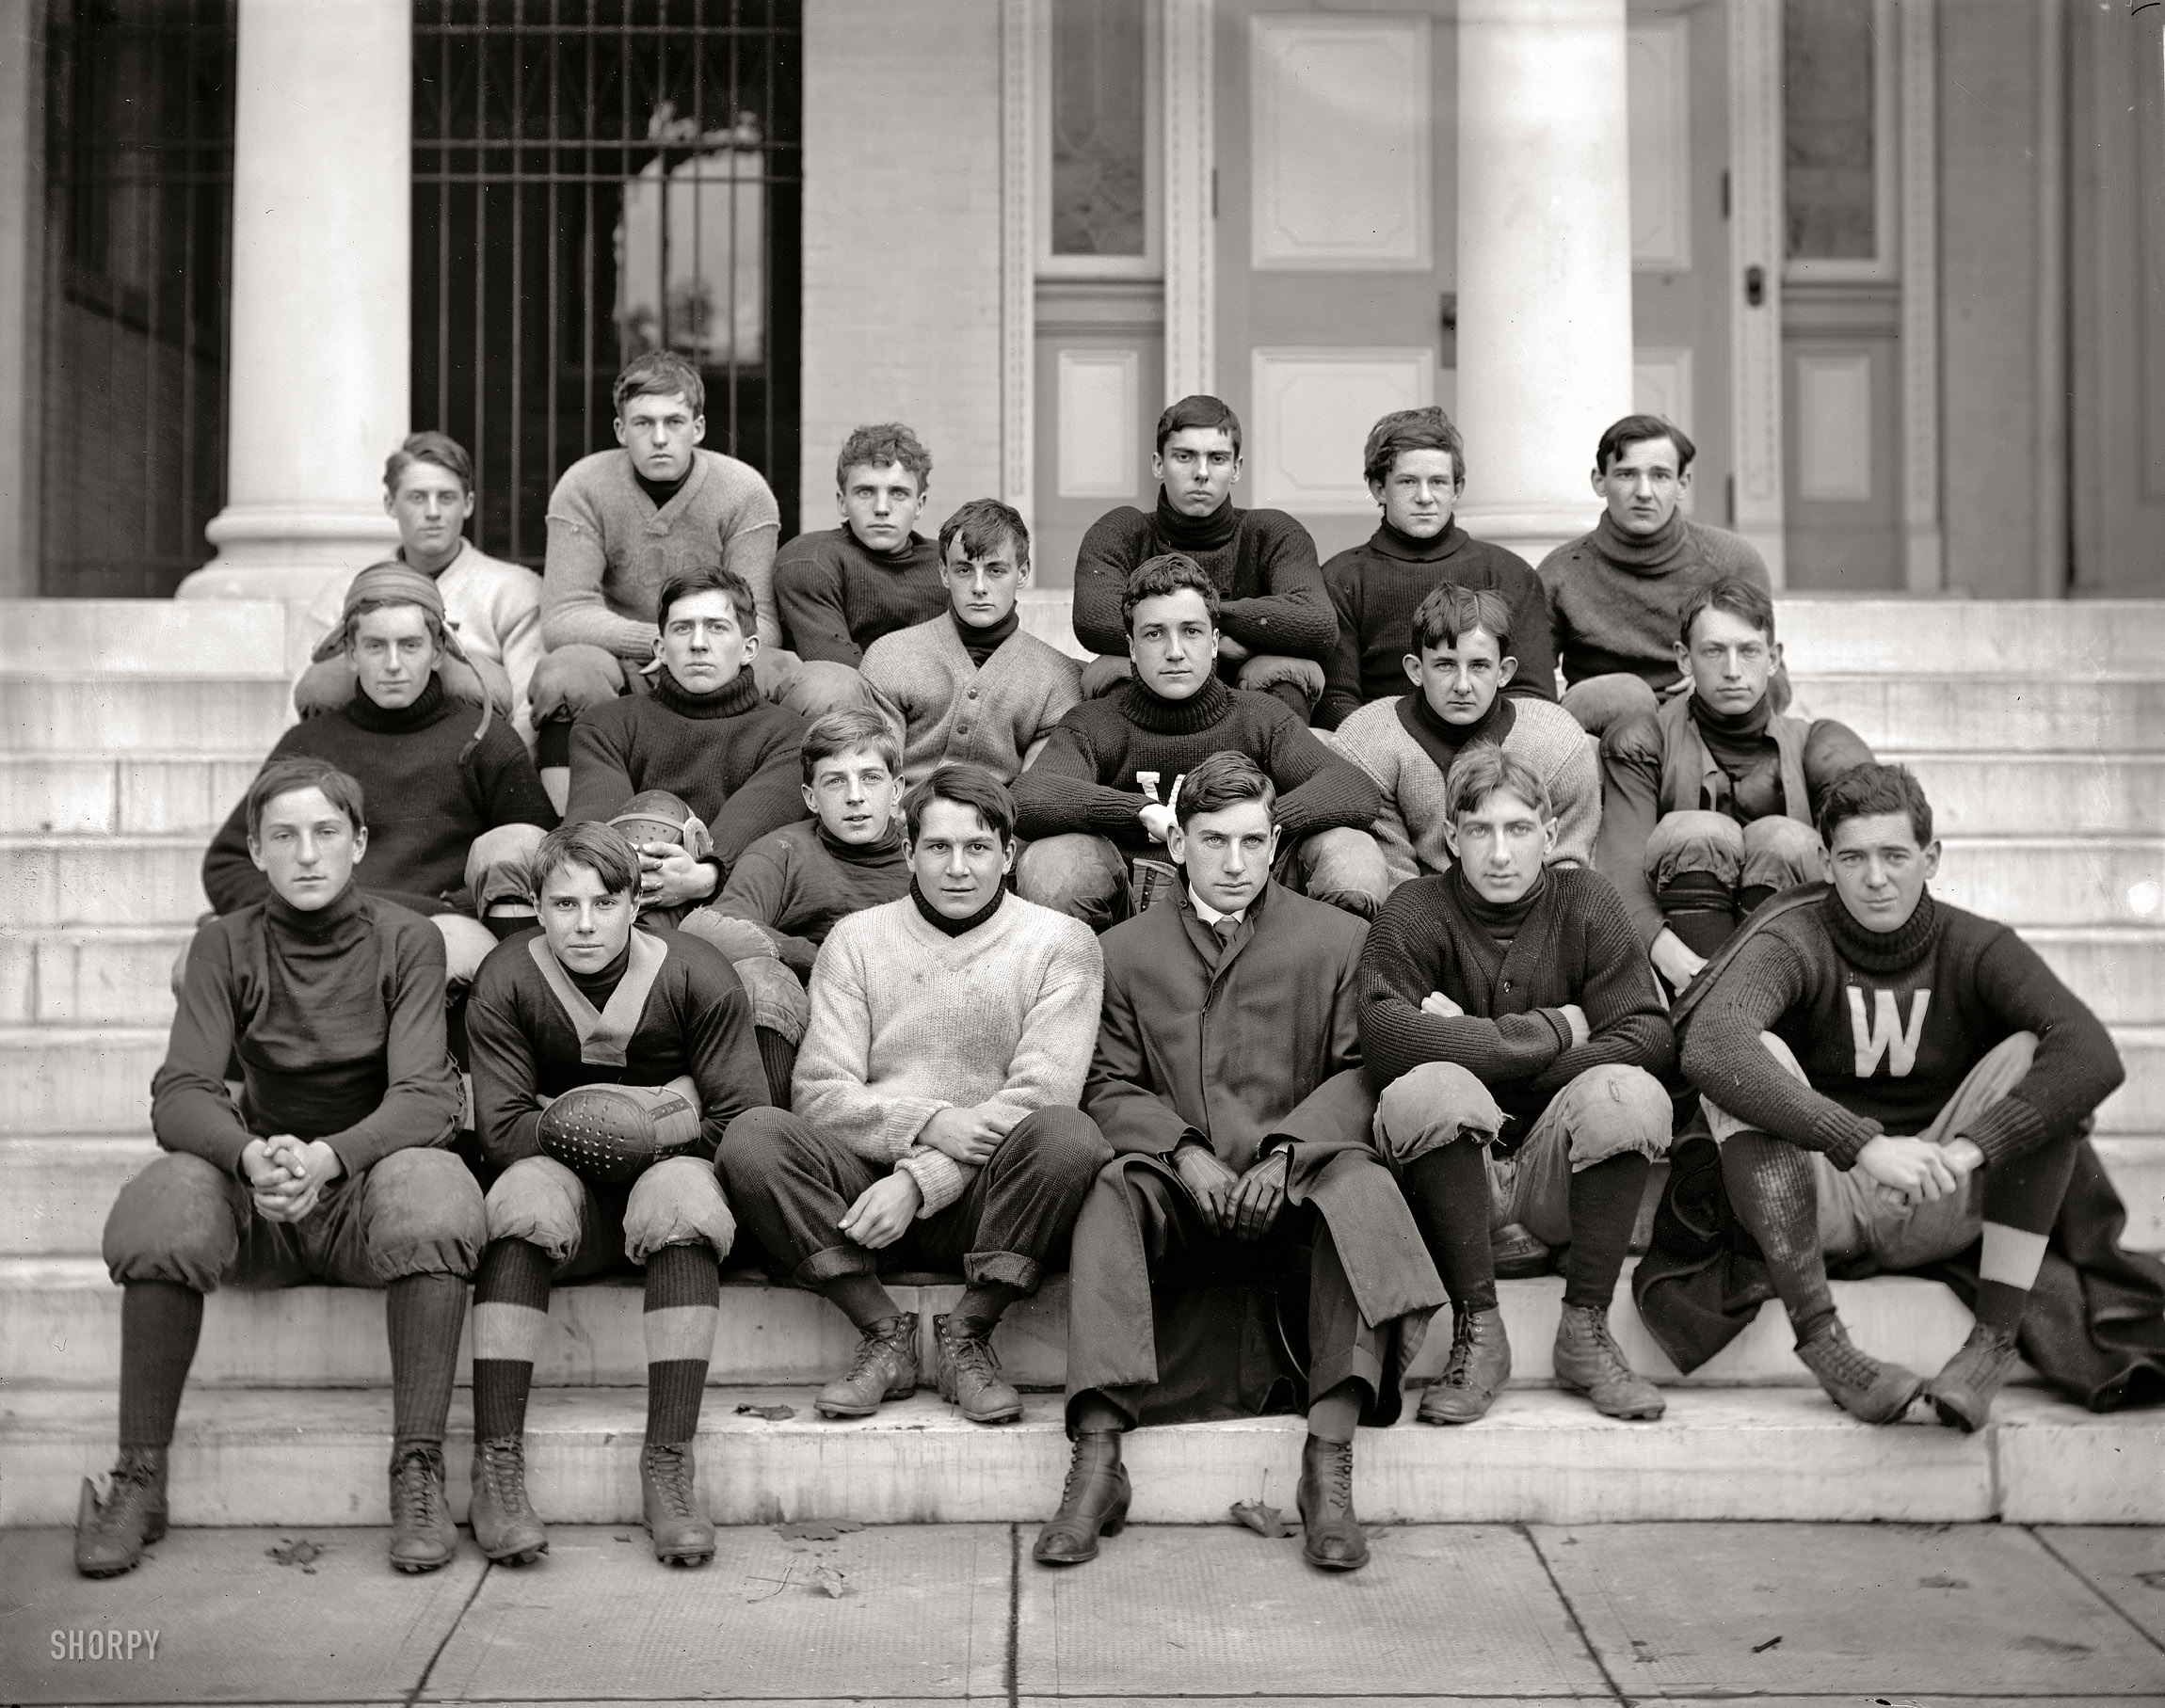 Washington, D.C., circa 1905. "Western High football." Three of these boys were seen earlier here. Harris & Ewing Collection glass negative. View full size.